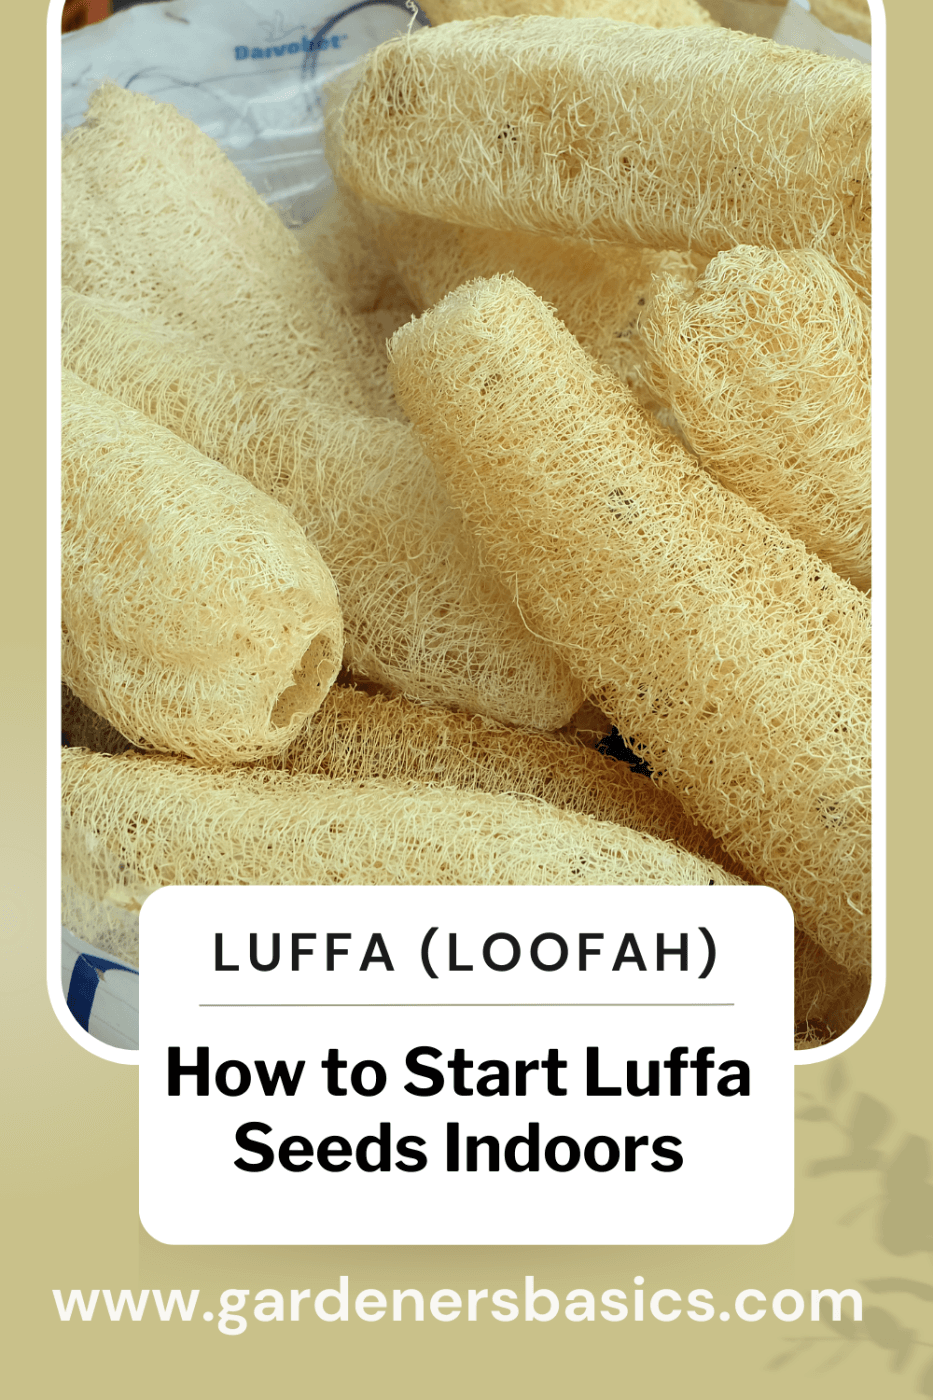 How to Start Luffa Seeds Indoors